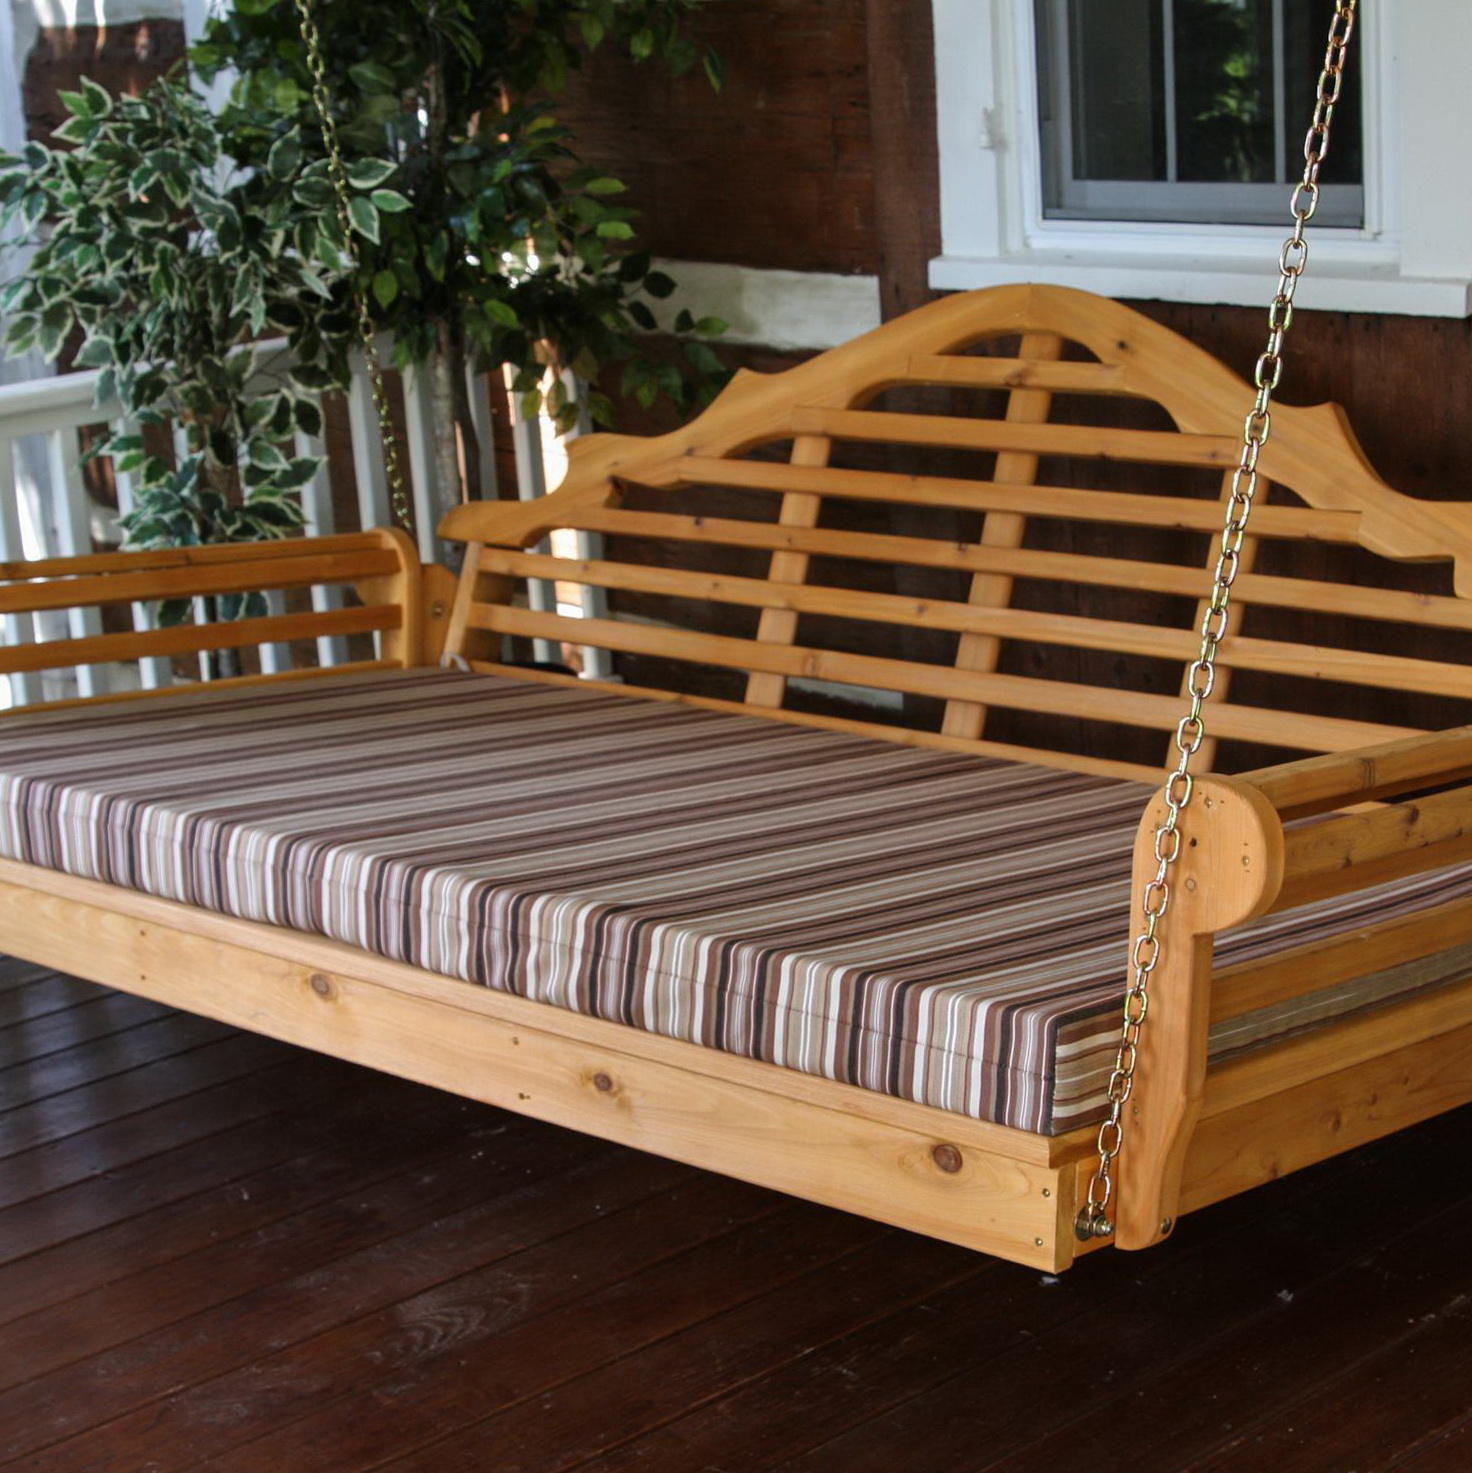 6 Foot Porch Swings For Sale | Home Design Ideas